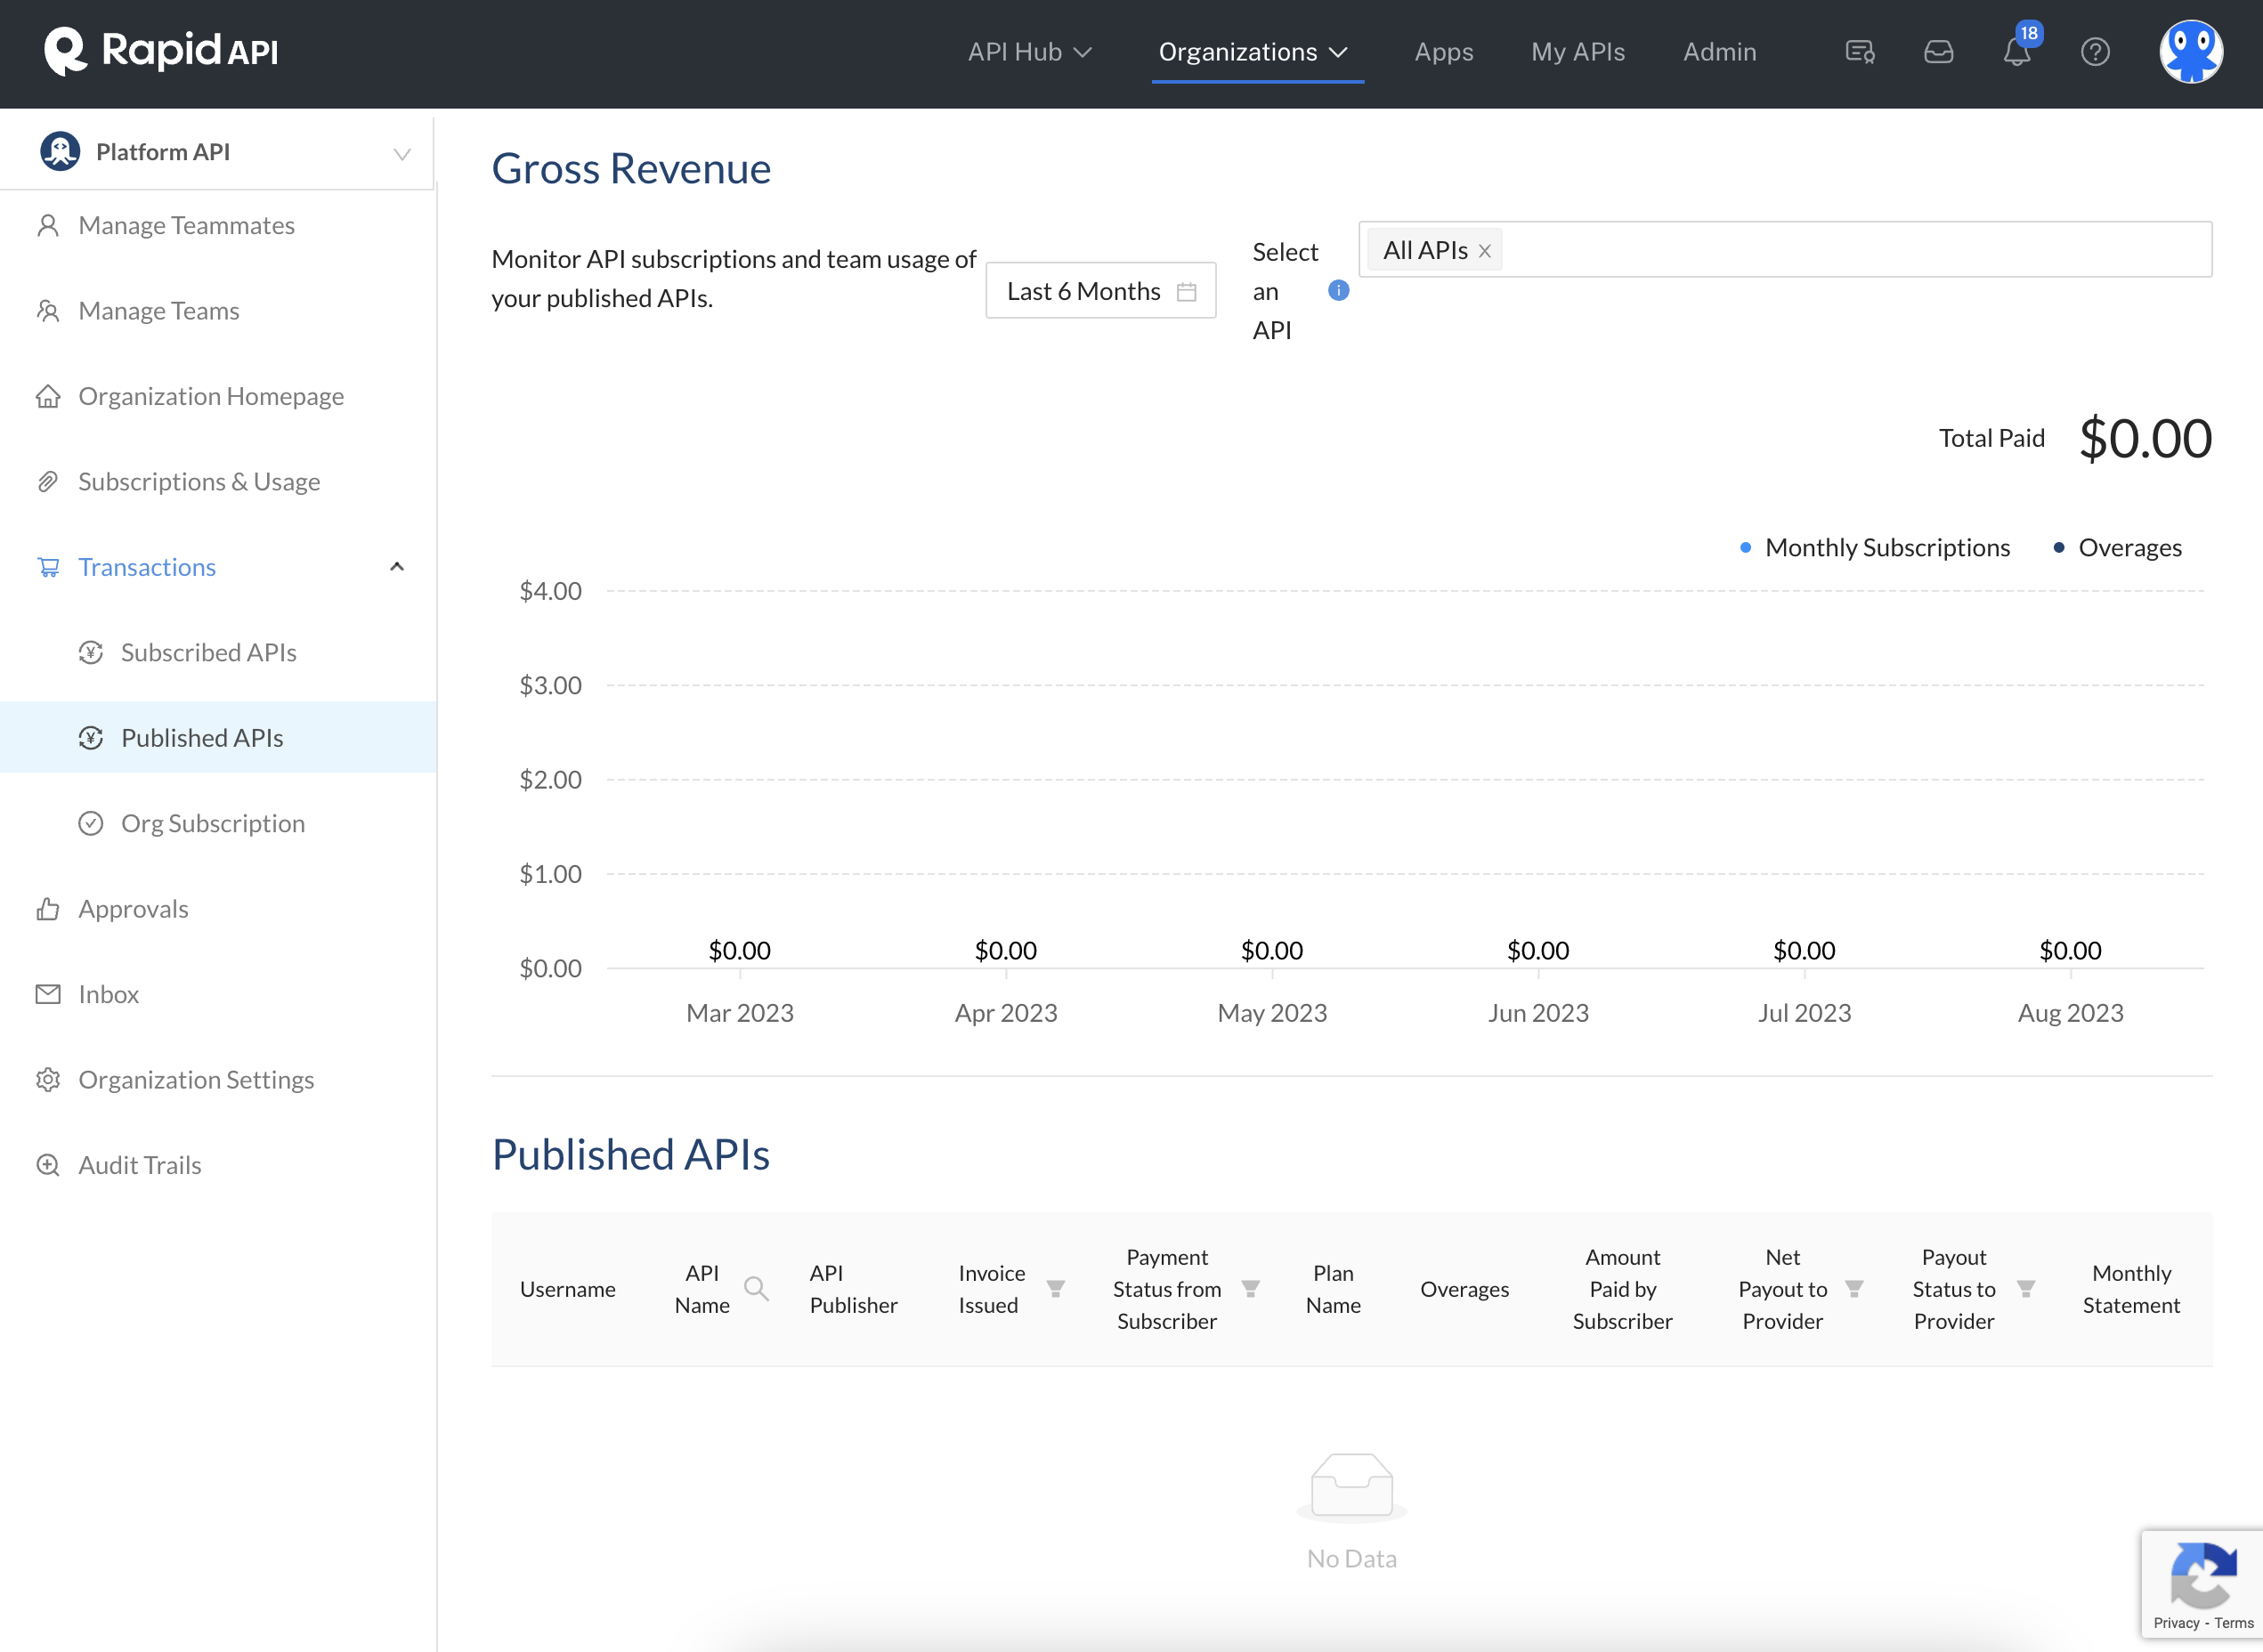 Viewing Published API revenue on the Organization Dashboard's Transactions tab.